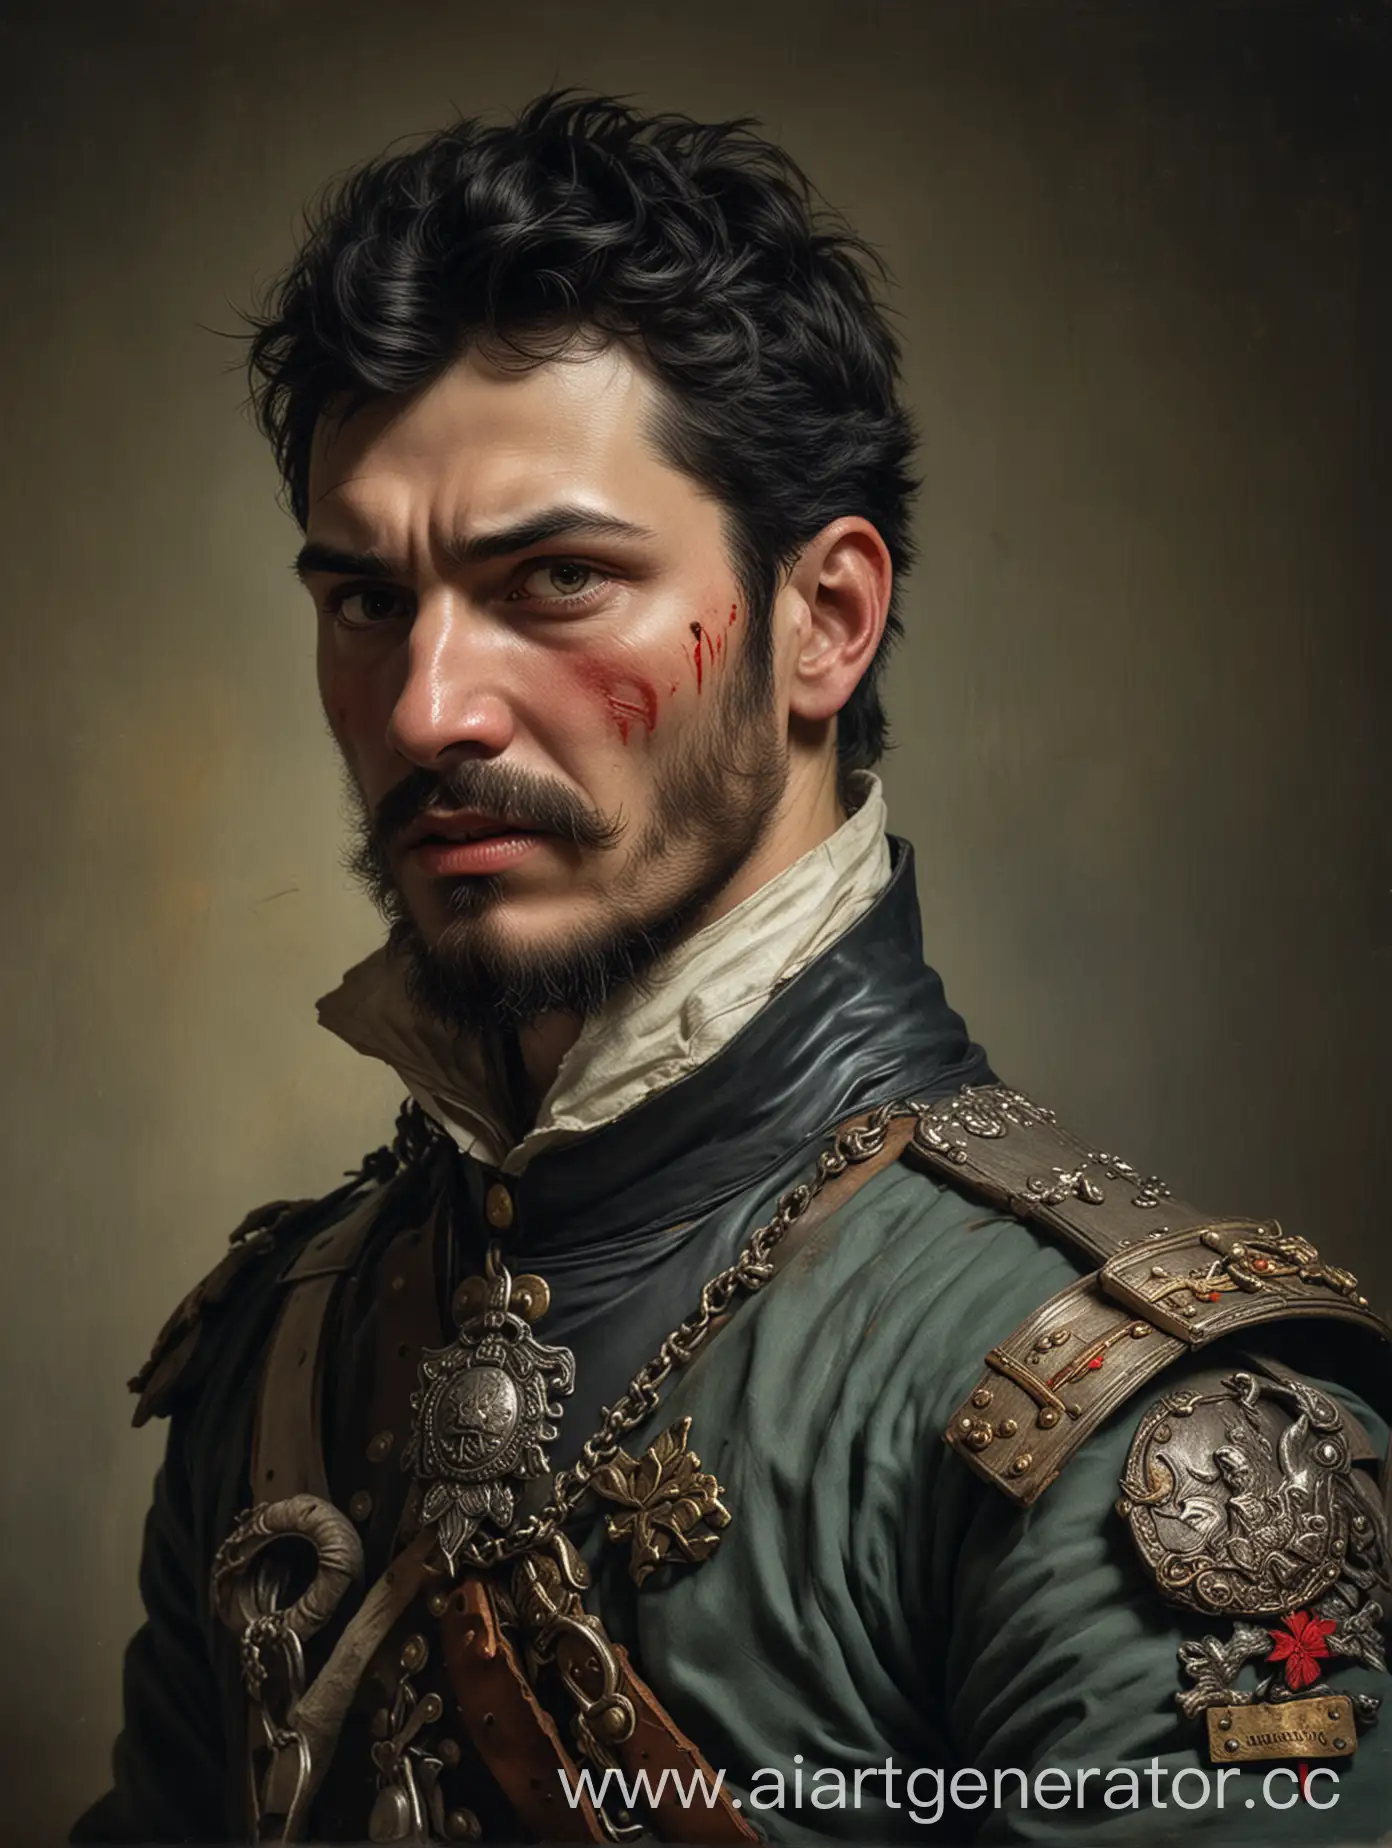 An officer of the Russian Guard of 1780 returns to his native state wounded. Black-haired, with a beard, with a bandaged hand on his neck with a pendant - a metal wolf fang